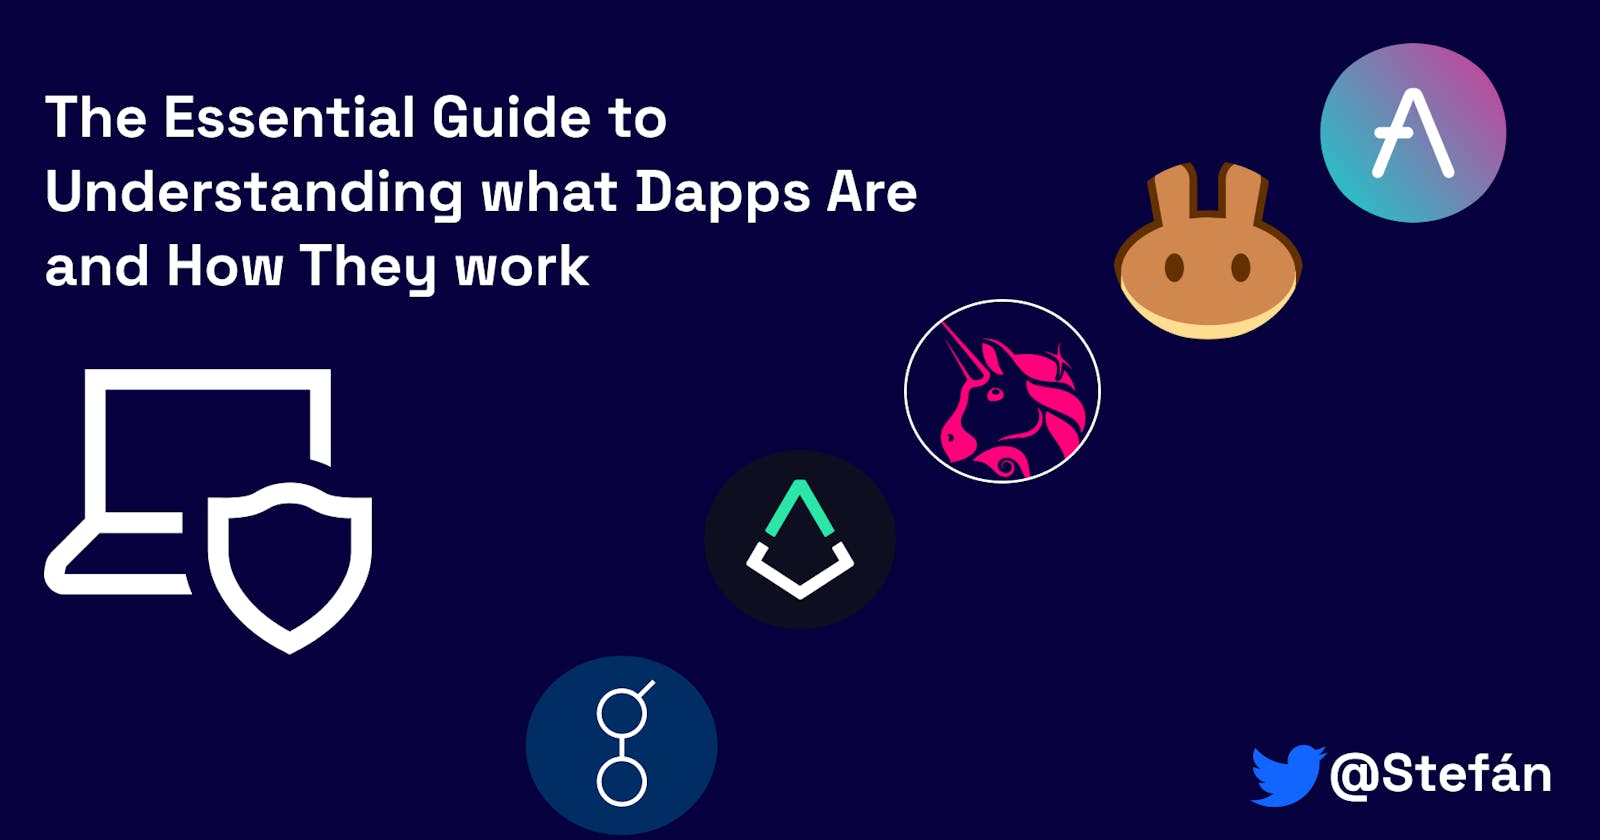 The Essential Guide to Understanding what Dapps Are and How They work